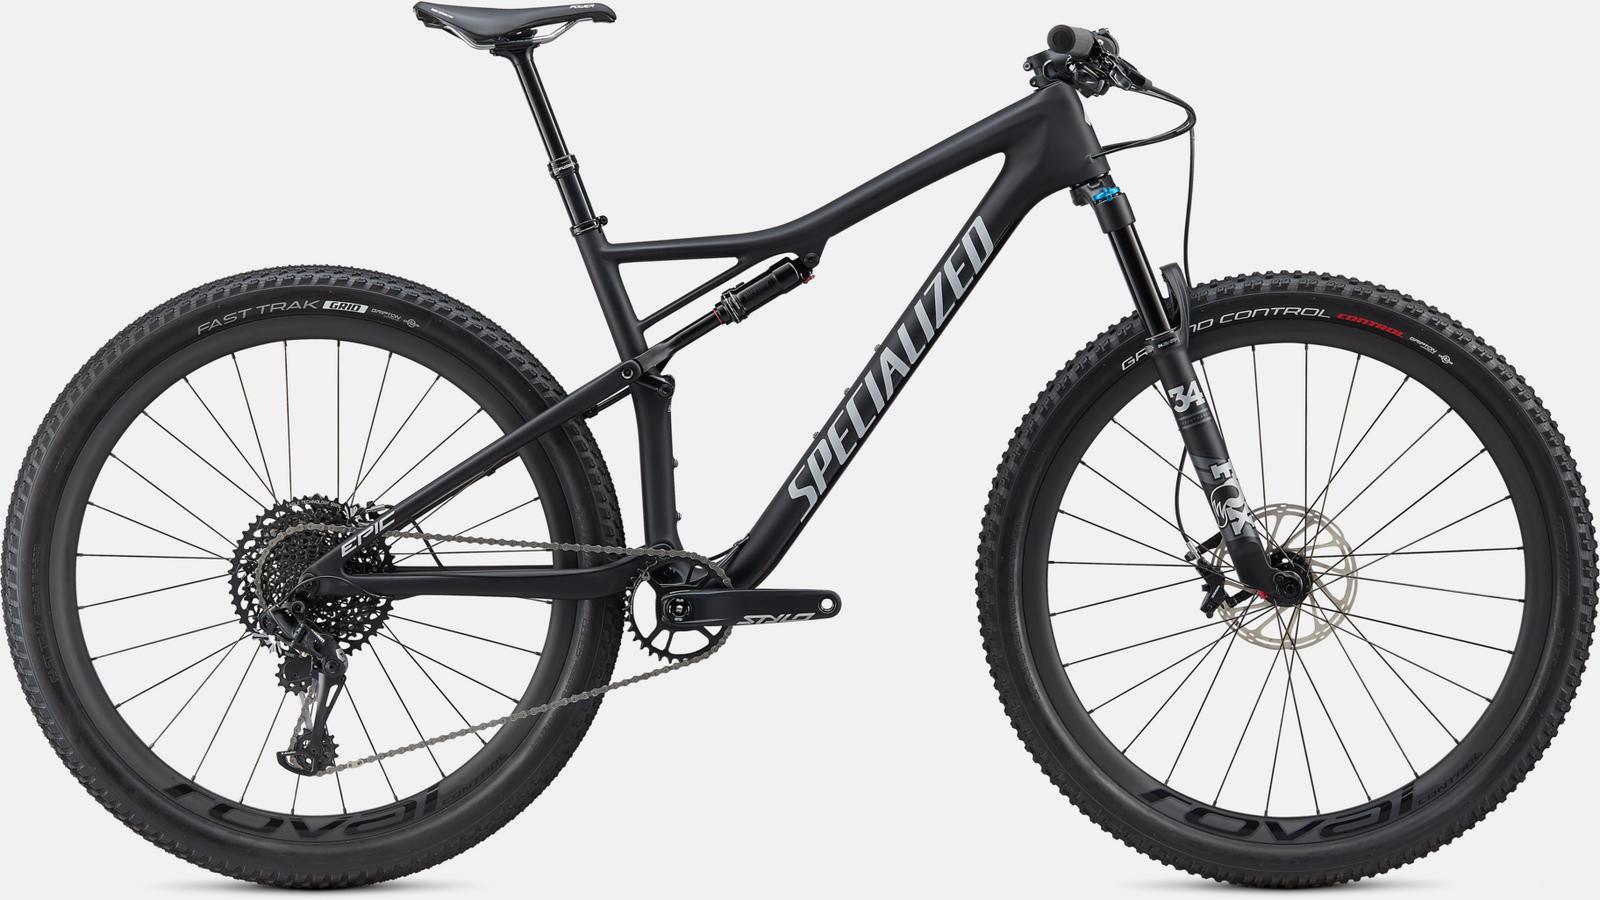 Paint for 2020 Specialized Epic Expert Carbon EVO - Satin Black